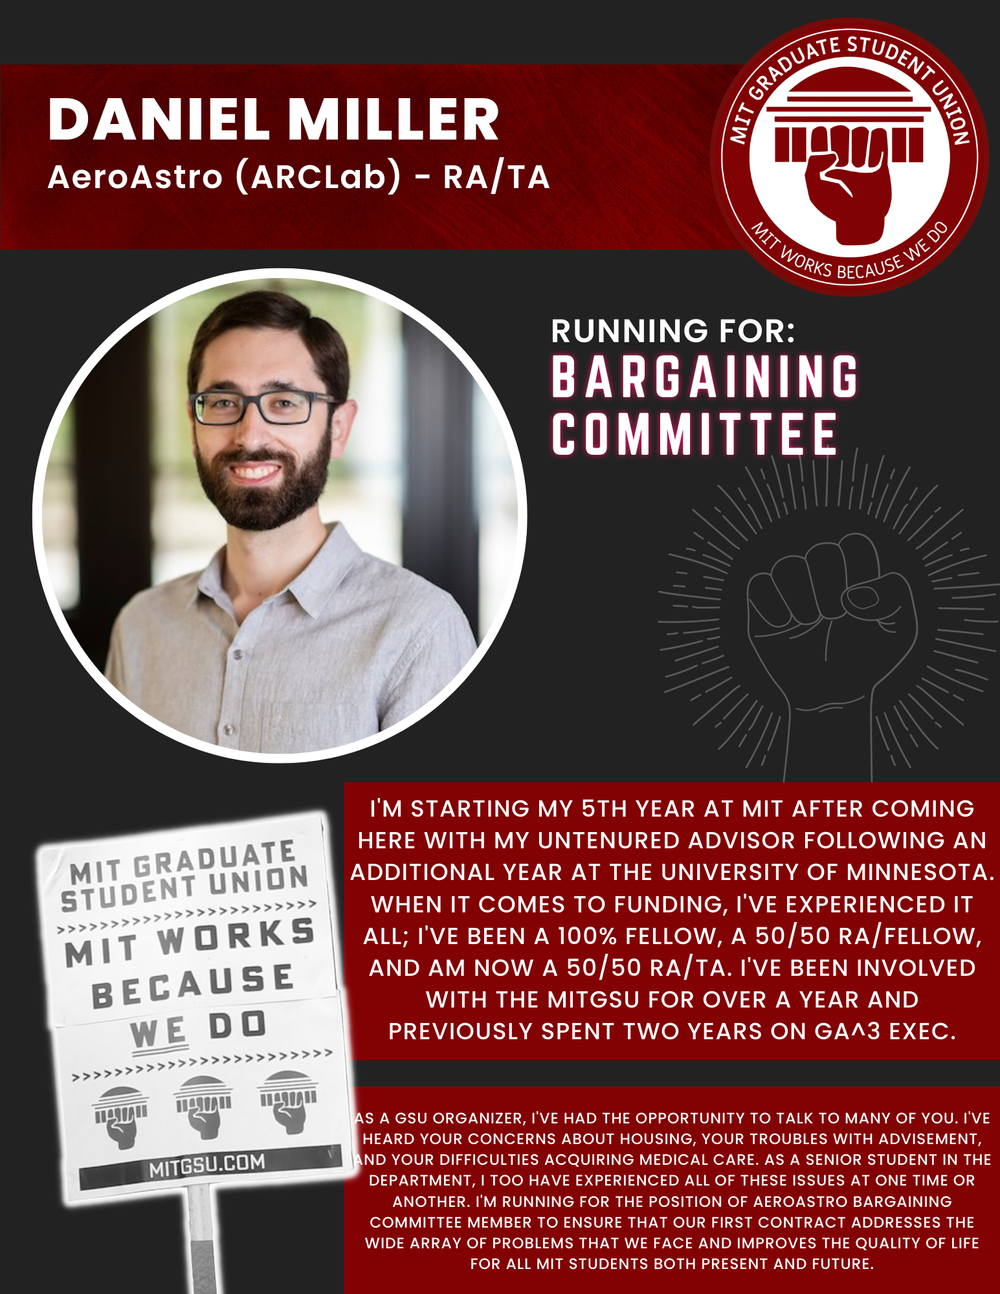  DANIEL MILLER   AeroAstro (ARCLab) - RA/TA   RUNNING FOR: Bargaining Committee  I'M STARTING MY 5TH YEAR AT MIT AFTER COMING HERE WITH MY UNTENURED ADVISOR FOLLOWING AN ADDITIONAL YEAR AT THE UNIVERSITY OF MINNESOTA.  WHEN IT COMES TO FUNDING, I'VE 